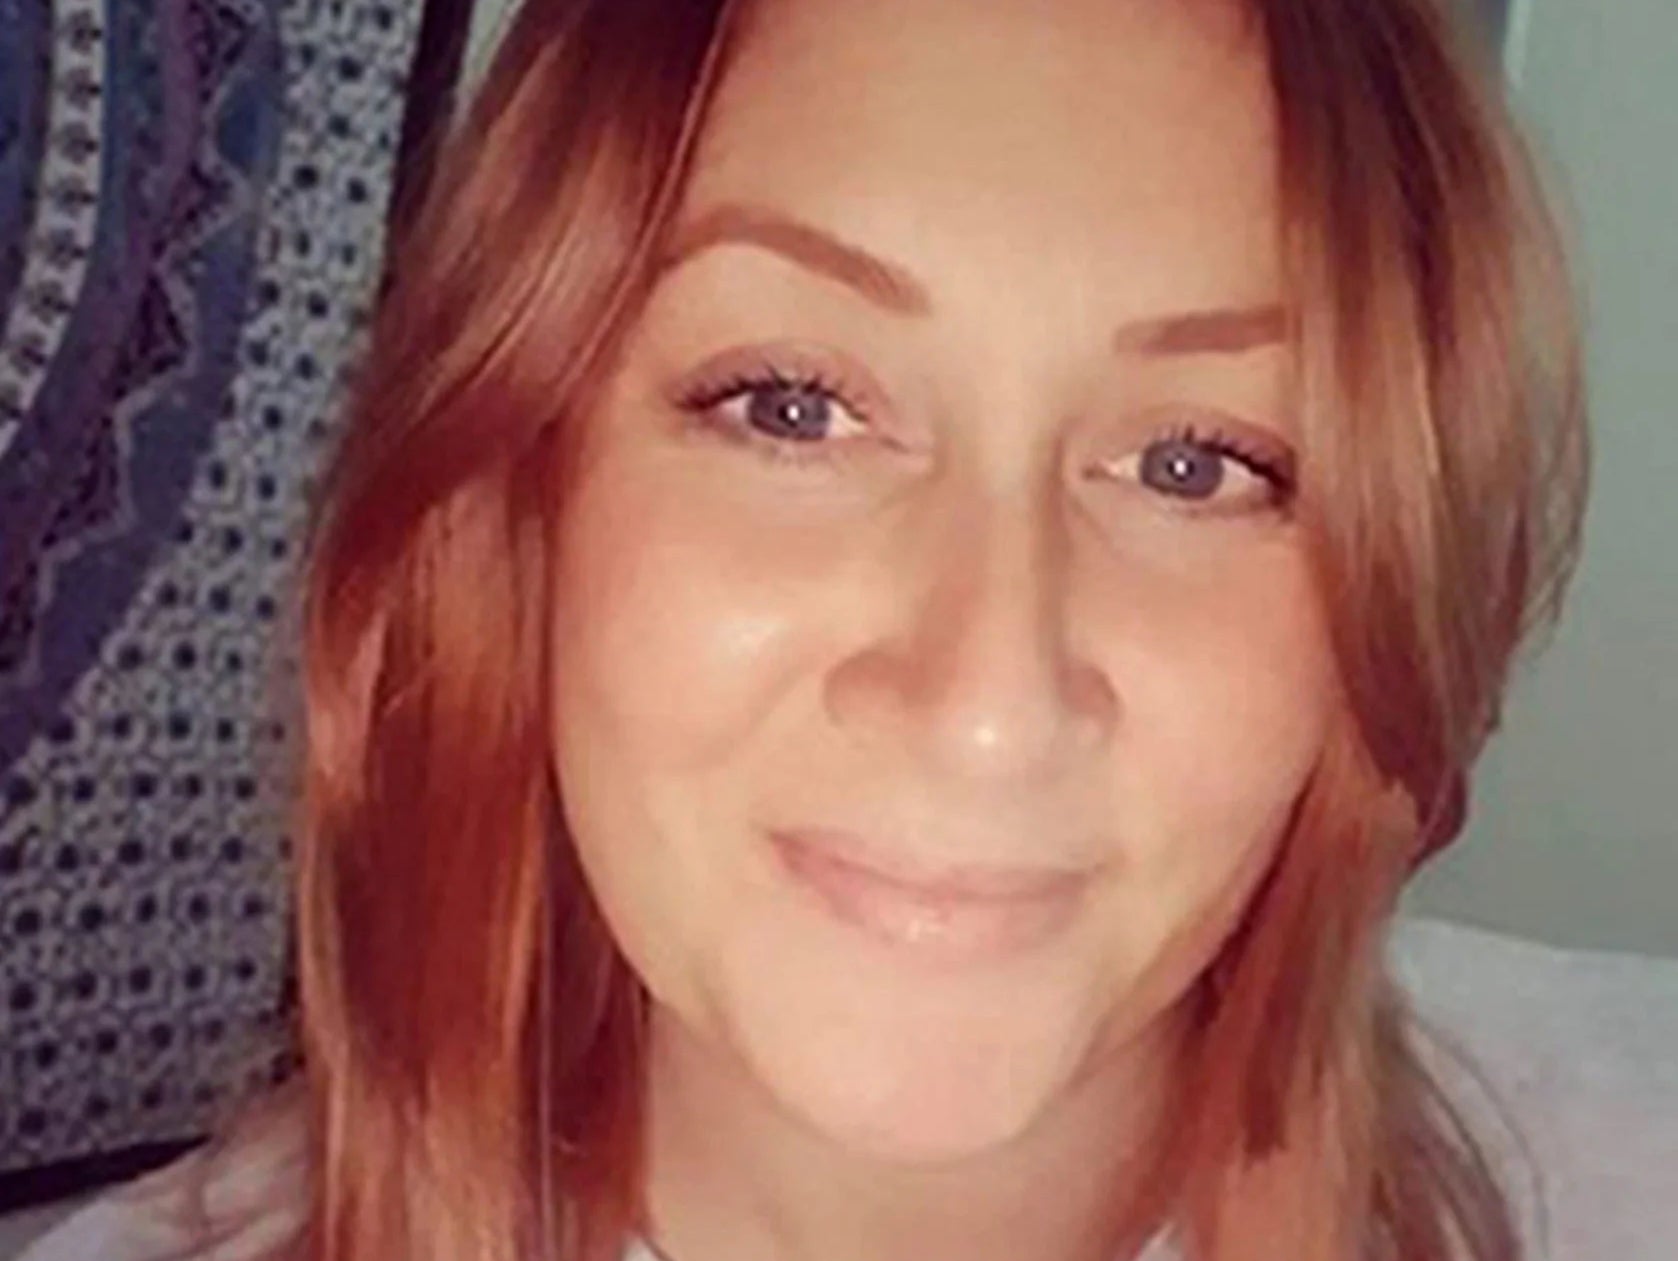 Katie Kenyon was last seen getting into a silver Ford Transit van on 22 April